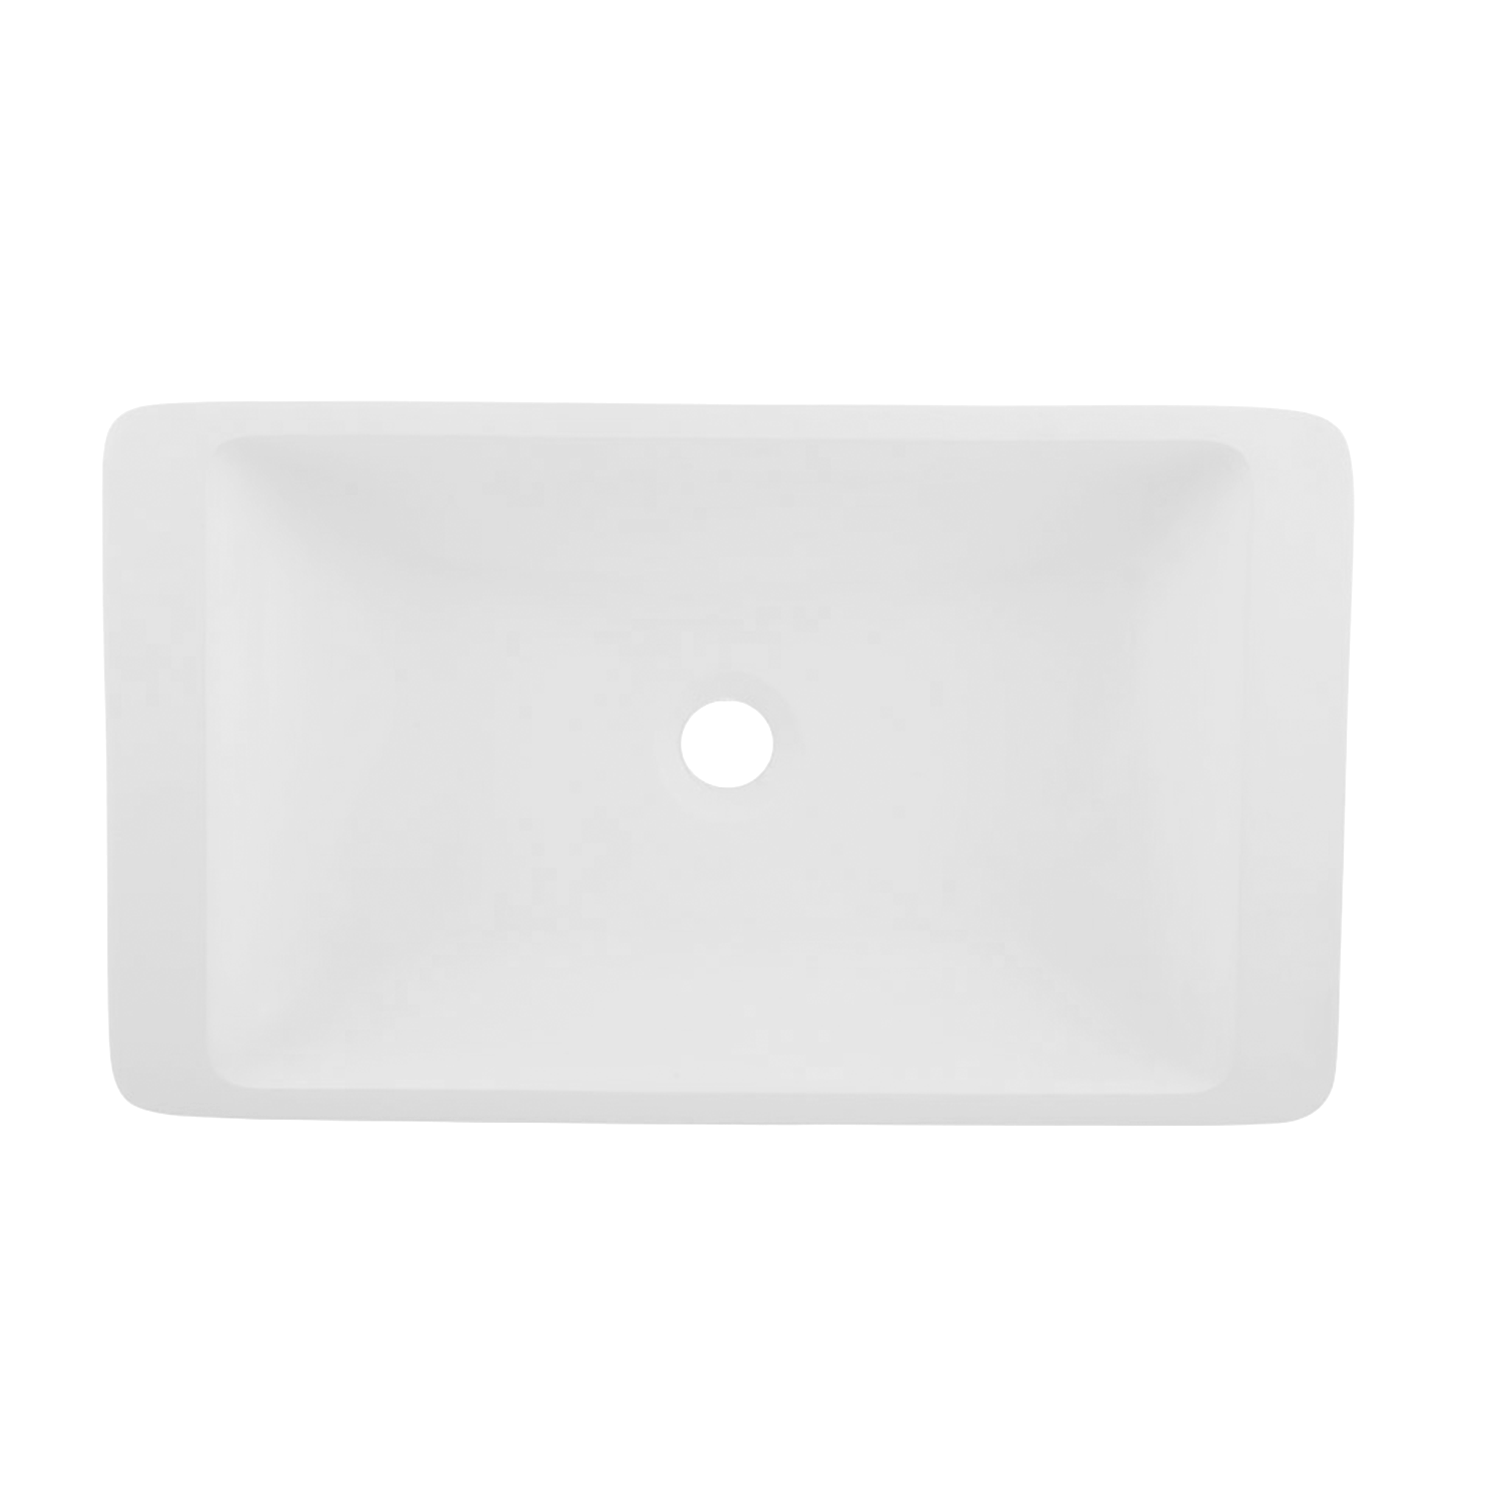 DAX Solid Surface Rectangle Single Bowl Bathroom Vessel Sink, White Matte Finish, 22-7/8 x 13-3/8 x 4 Inches (DAX-AB-1321)